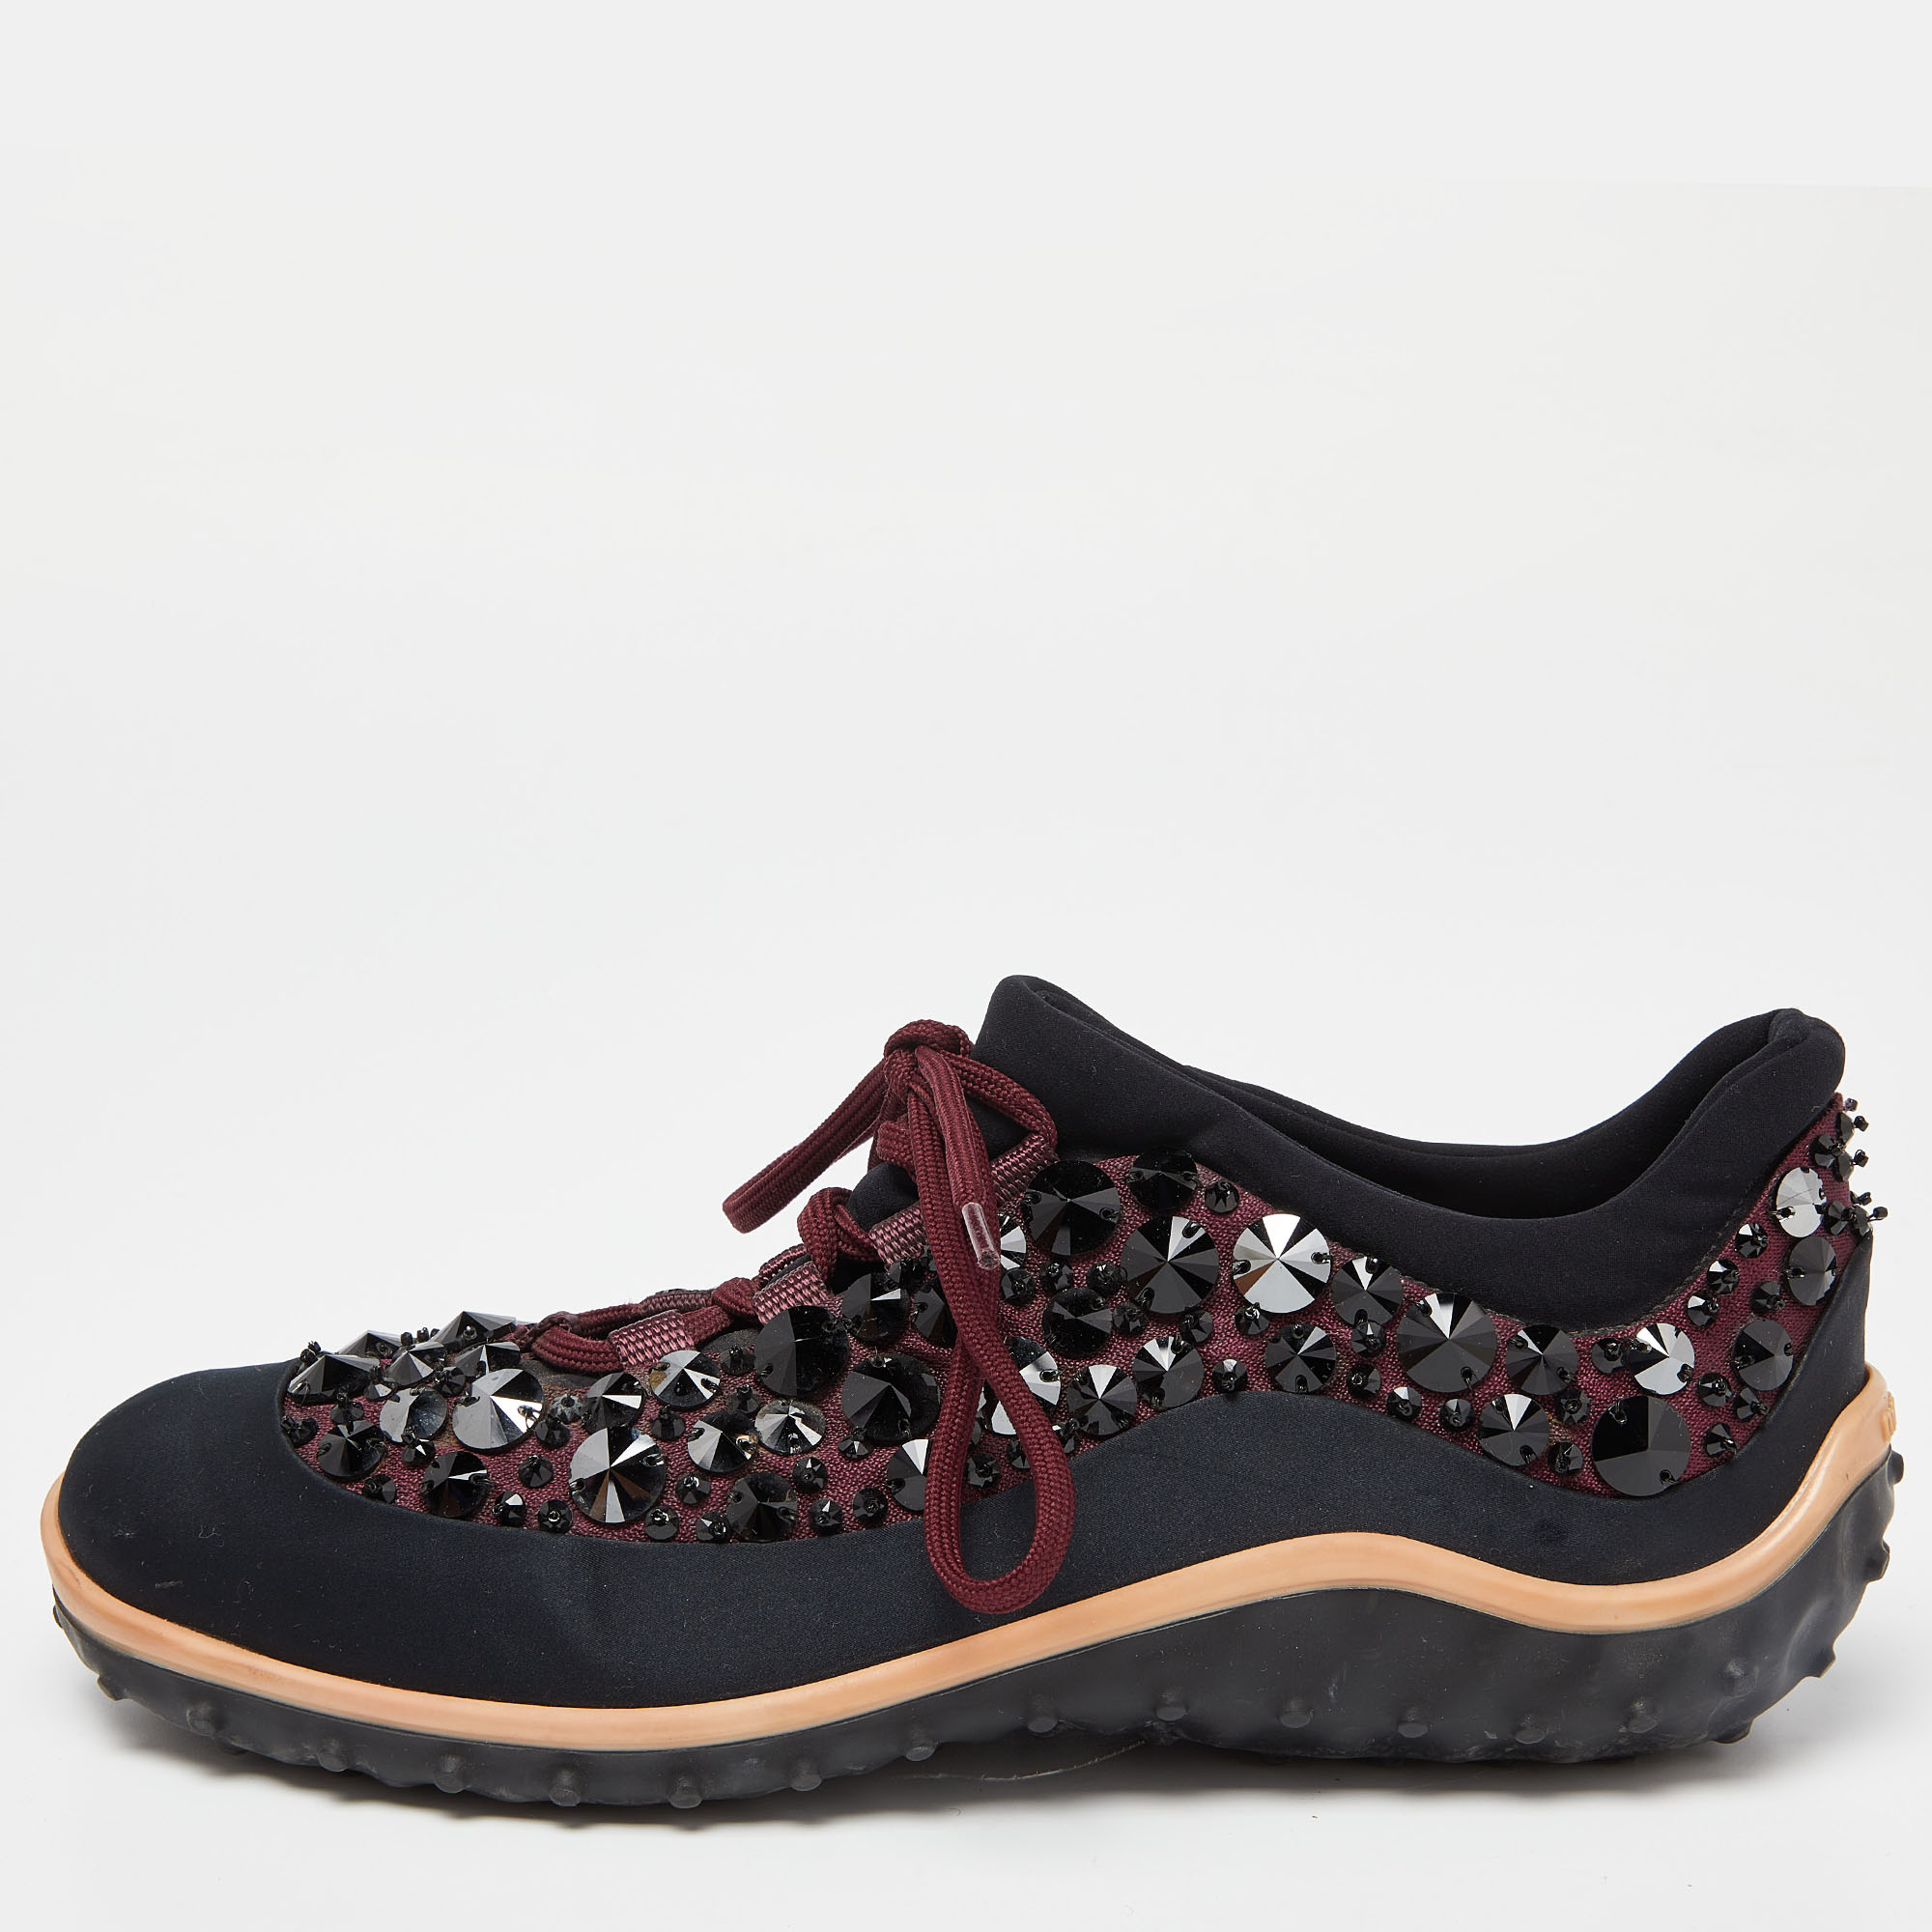 Pre-owned Miu Miu Black/burgundy Embellished Fabric And Satin Astro Sneakers Size 39